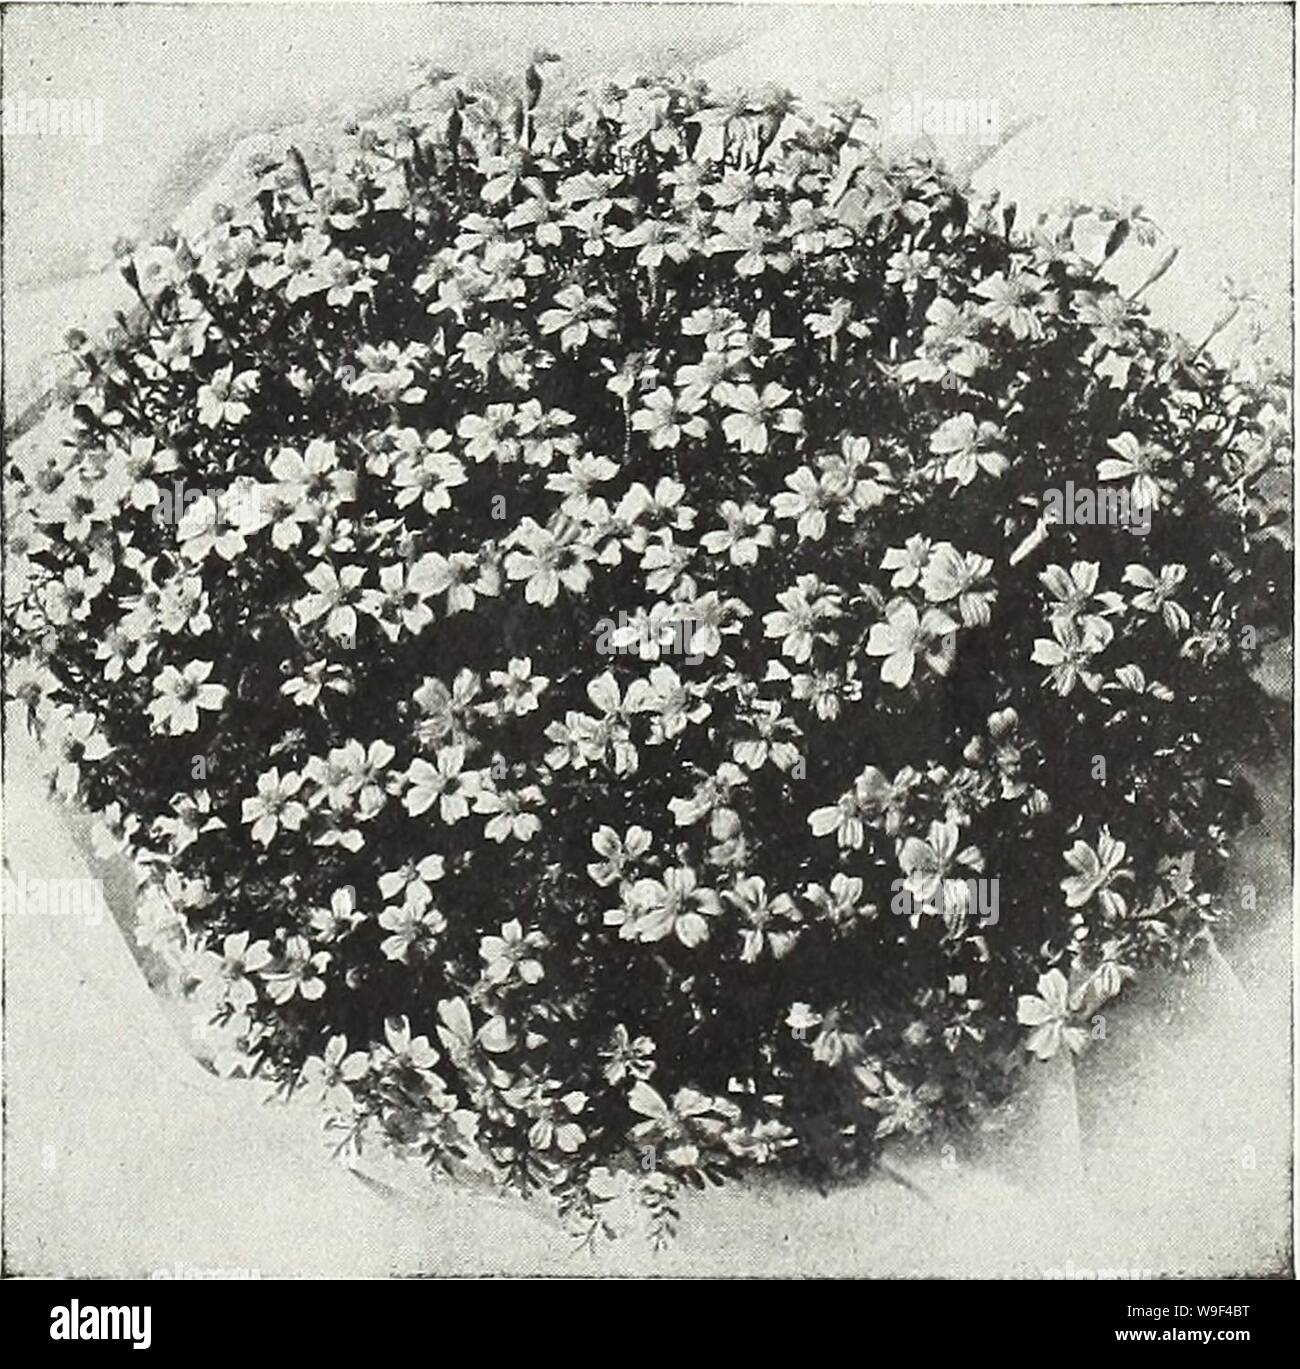 Archive image from page 14 of Currie's garden annual  spring. Currie's garden annual : spring 1936 61st year  curriesgardenann19curr 2 Year: 1936 ( Phlox Art Shades NASTURTIUM DWARF DOUBLE GEM MIXTURE Our Gem Mixture, composed of an evenly balanced range of cheerful colors on dwarf, compact, gem-like plants, is the ideal annual for borders and edging use. The plants are truly dwarf and compact, totally with- out runners, and hold their compact form even in rainv climates where they will be a boon to garden makers. At the California International Exposition in San Diego, where they are being ex Stock Photo